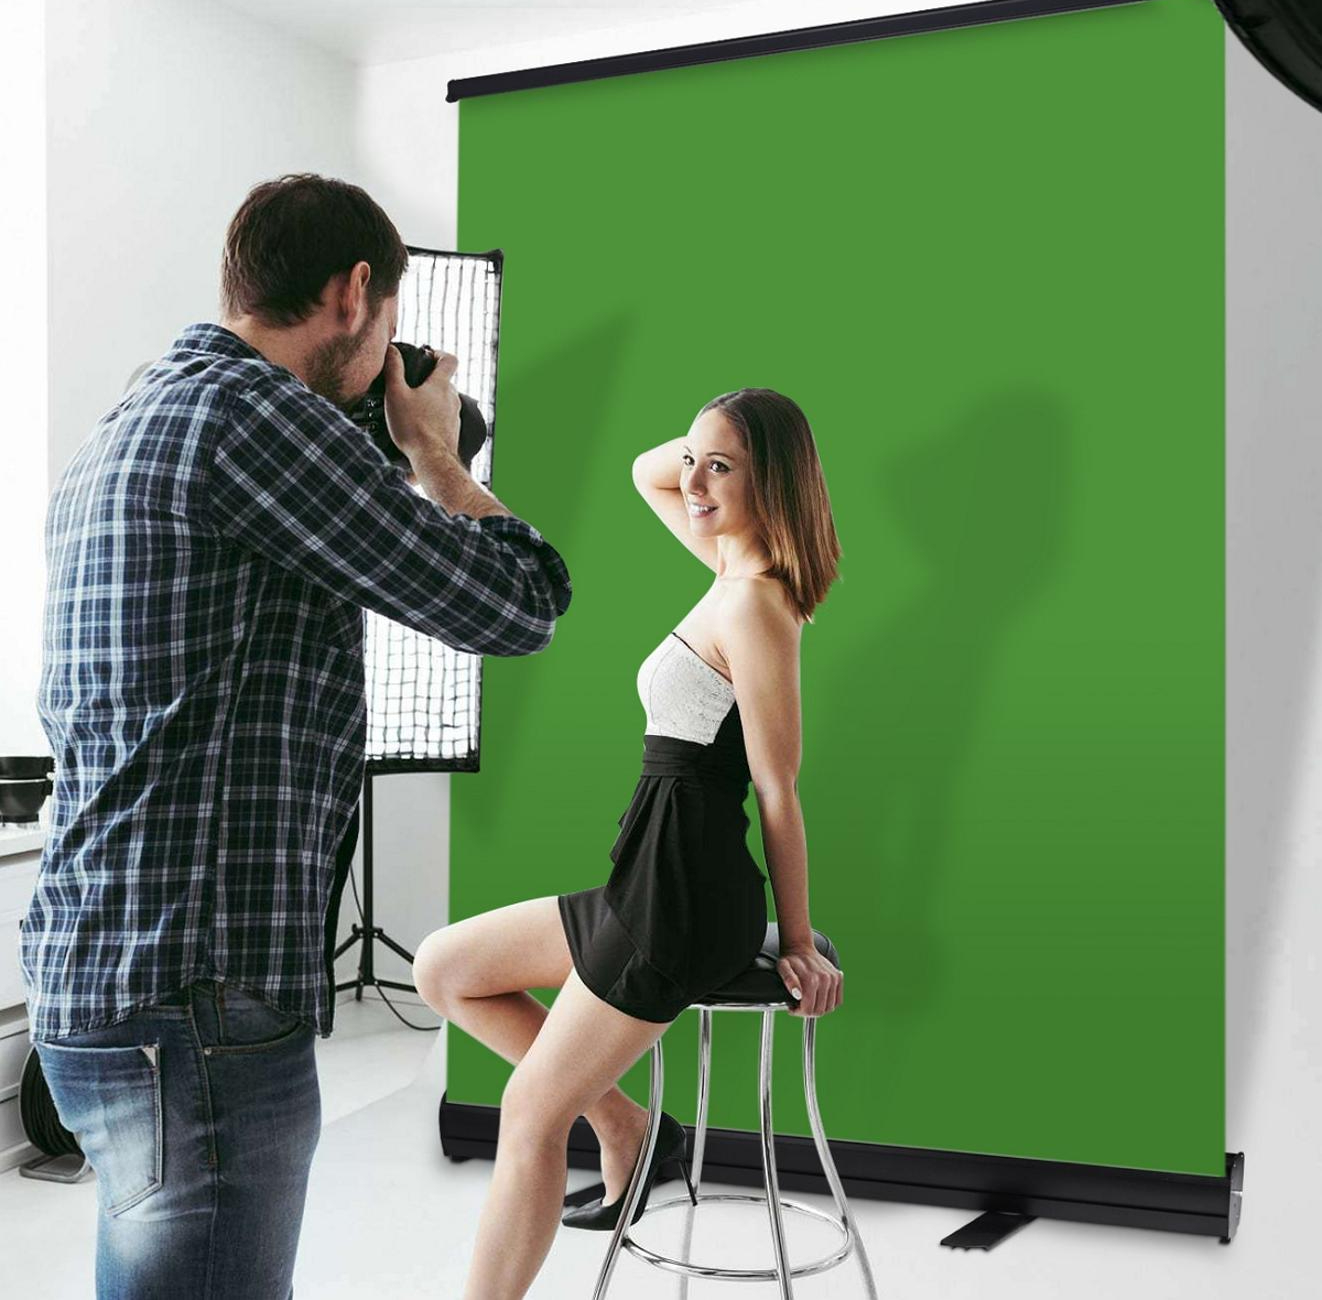 Collapsible Green Screen Pull-up Style